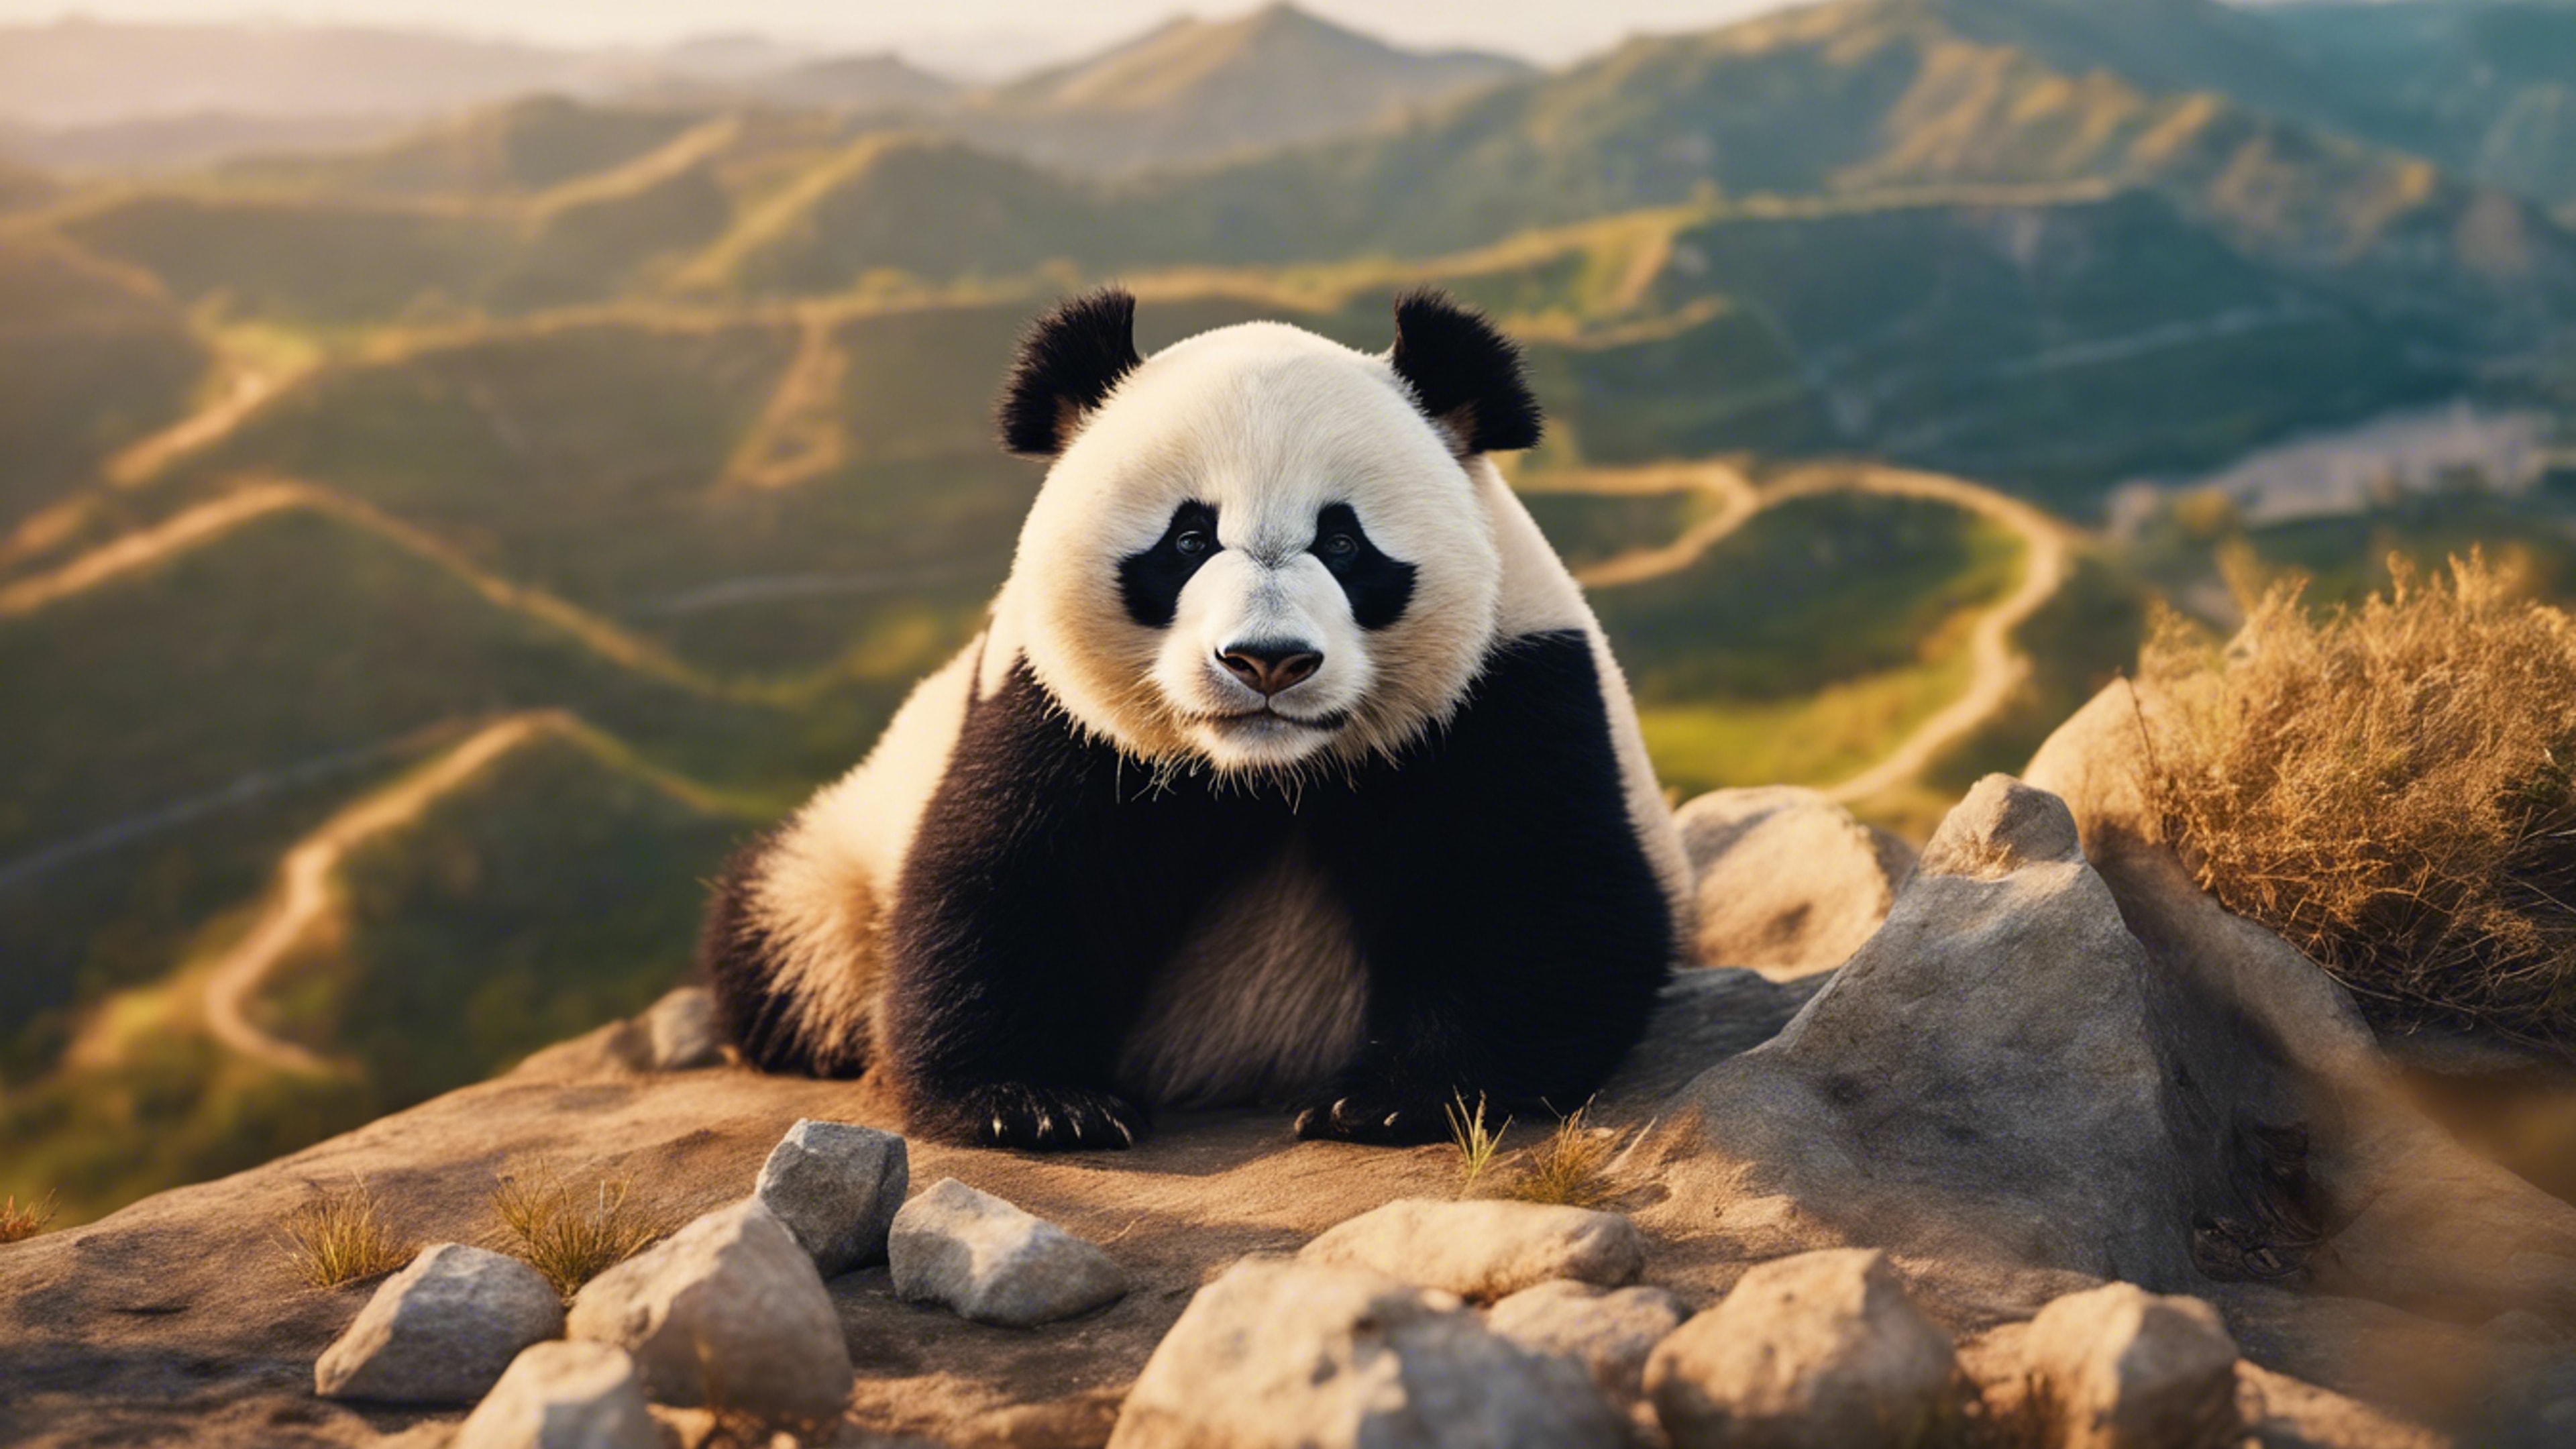 A proud panda basking in the warm sunlight, on a cliff overlooking a wide, beautiful valley. Tapet[f1b4c4cbced14ad39a34]